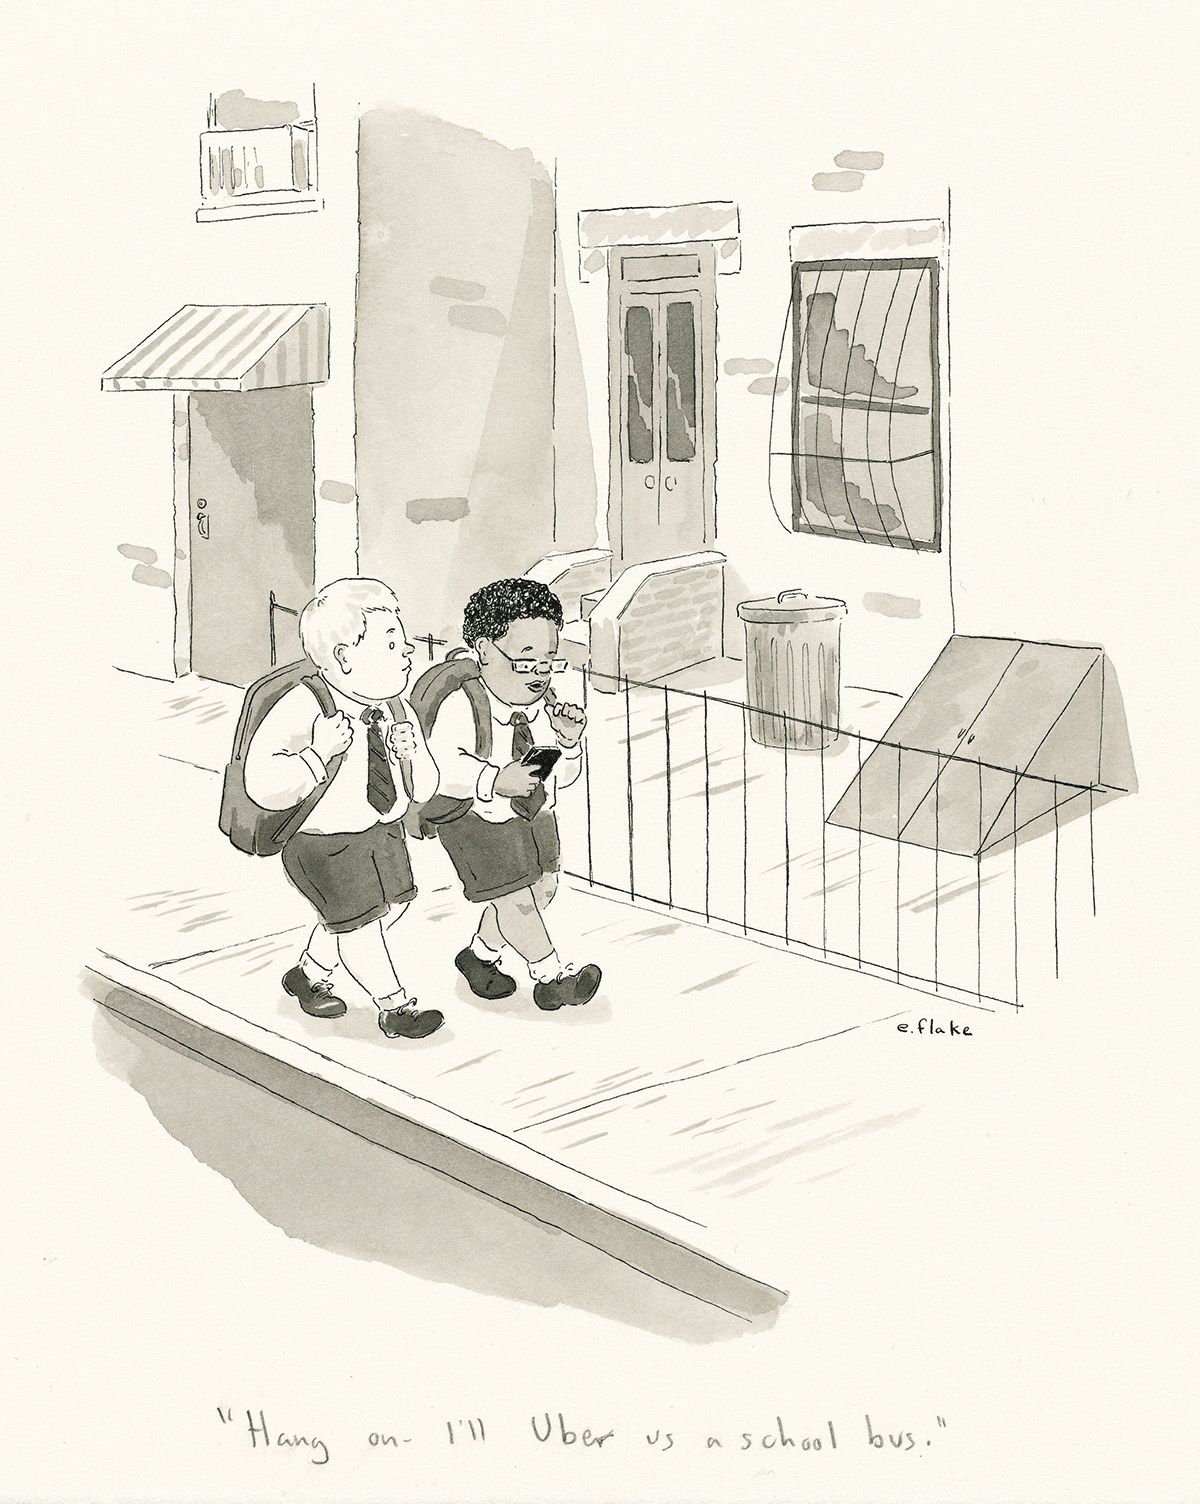 THE NEW YORKER. EMILY FLAKE. Hang on - Ill Uber us a school bus.